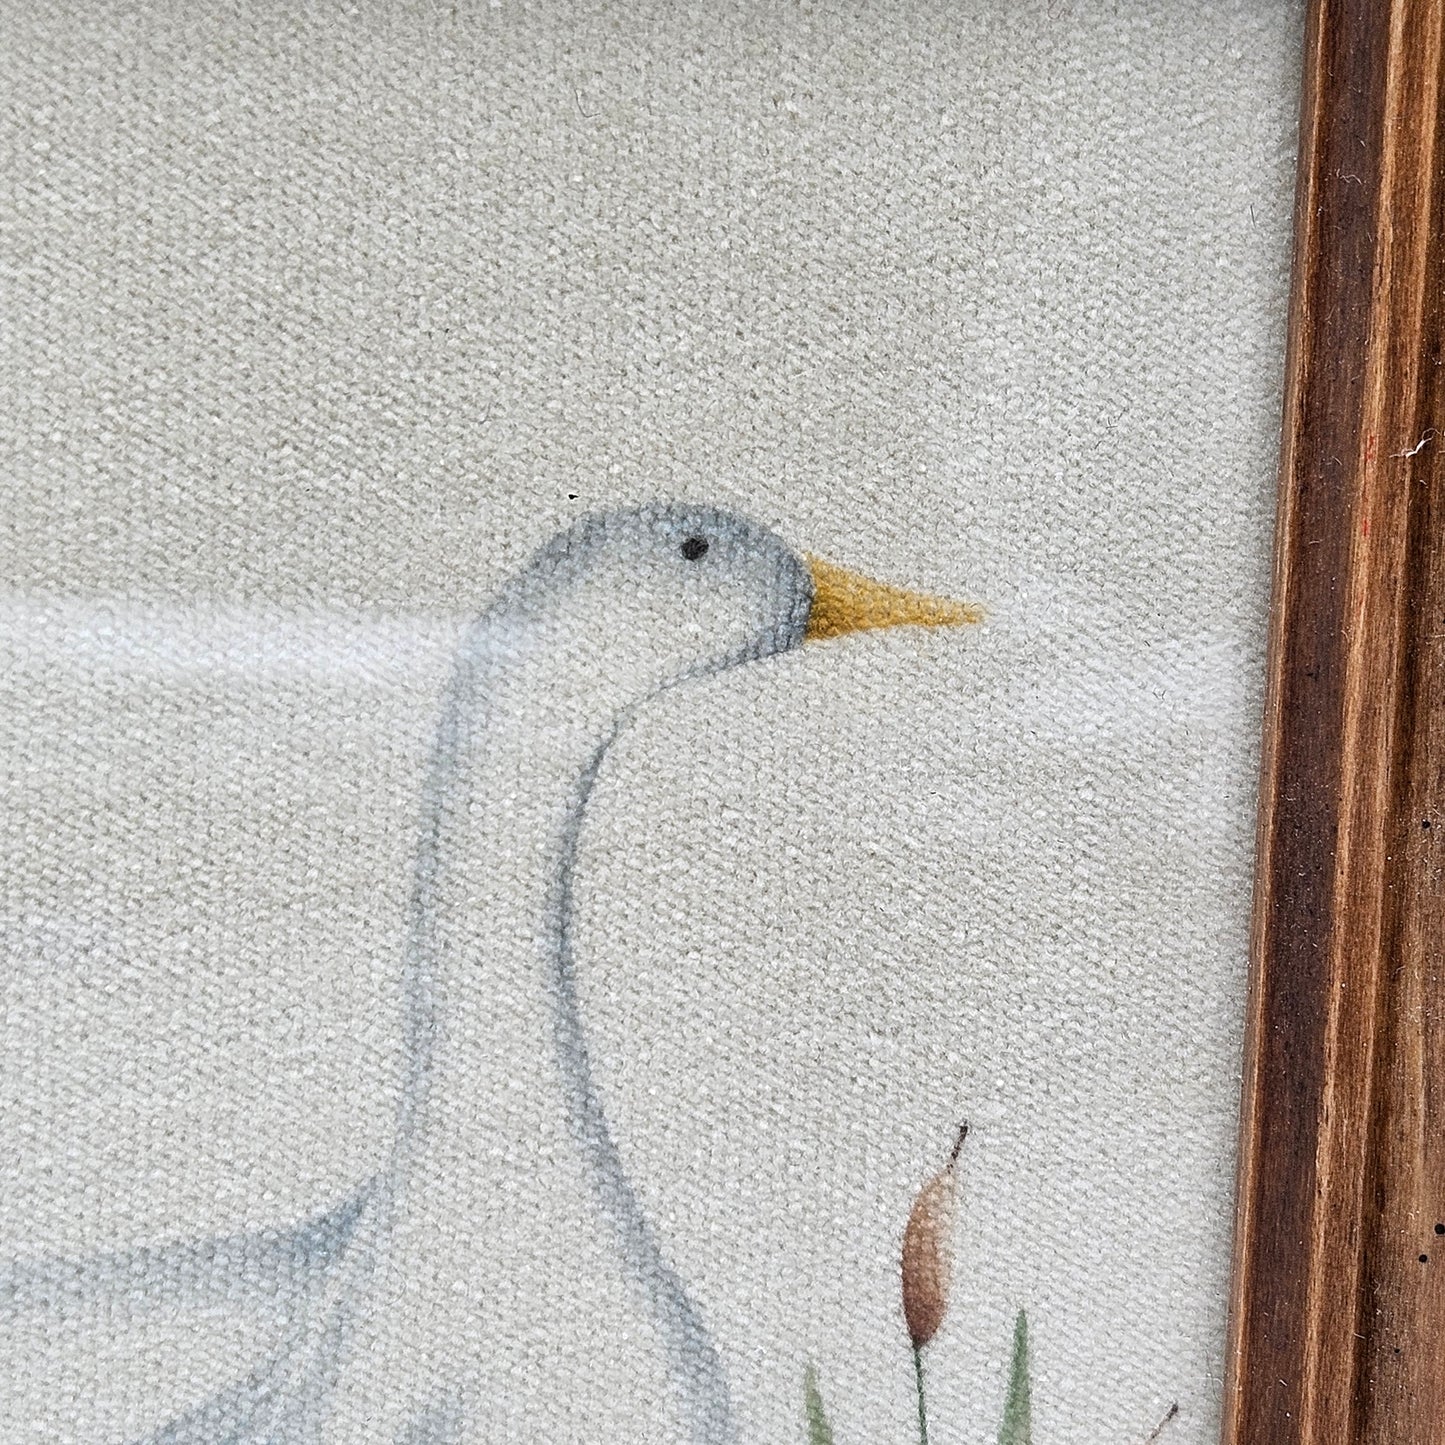 Signed Watercolor Painting on Canvas of Goose at Waters Edge in Wooden Frame